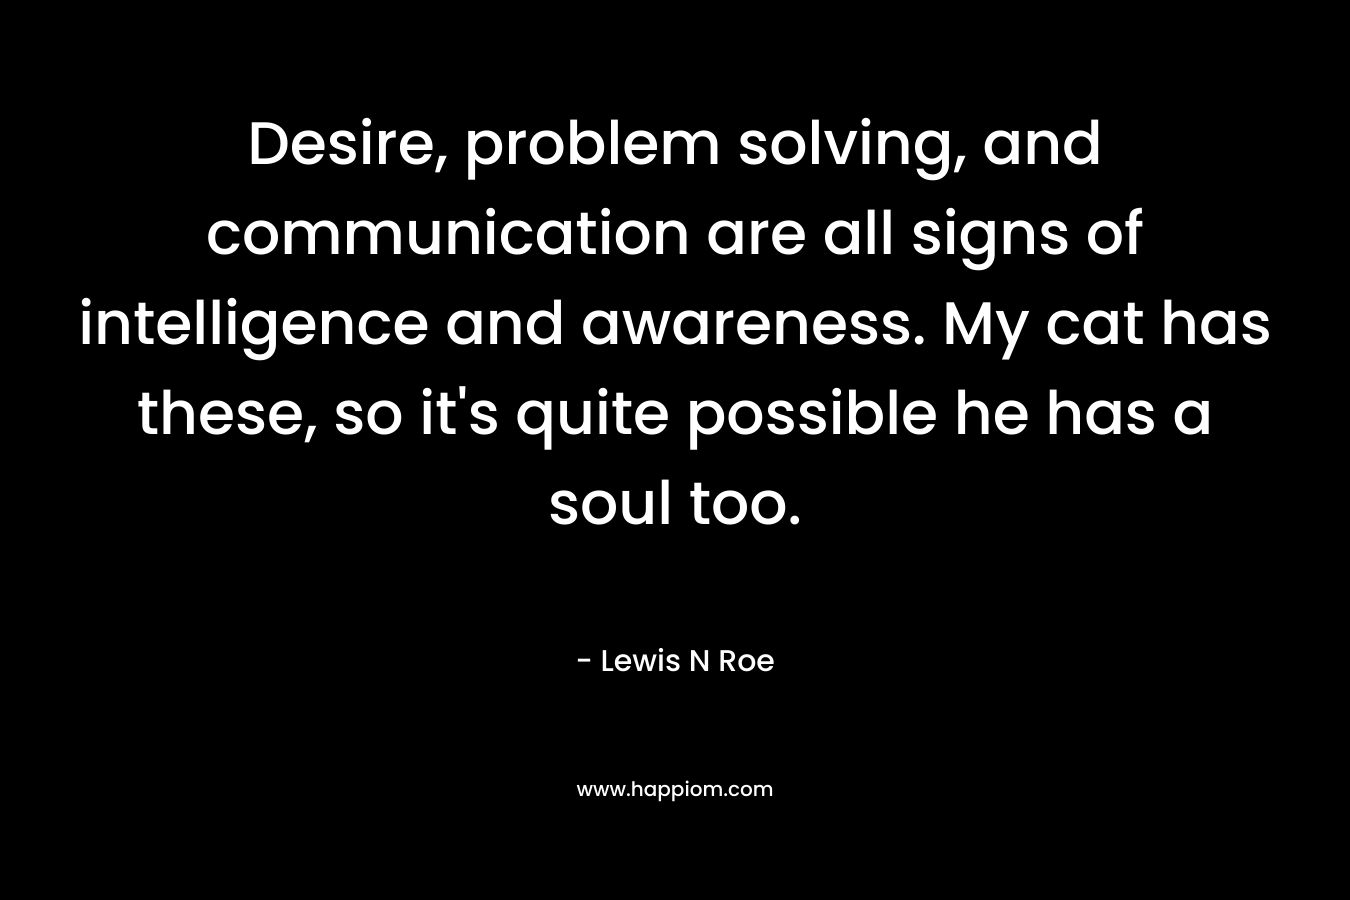 Desire, problem solving, and communication are all signs of intelligence and awareness. My cat has these, so it’s quite possible he has a soul too. – Lewis N Roe